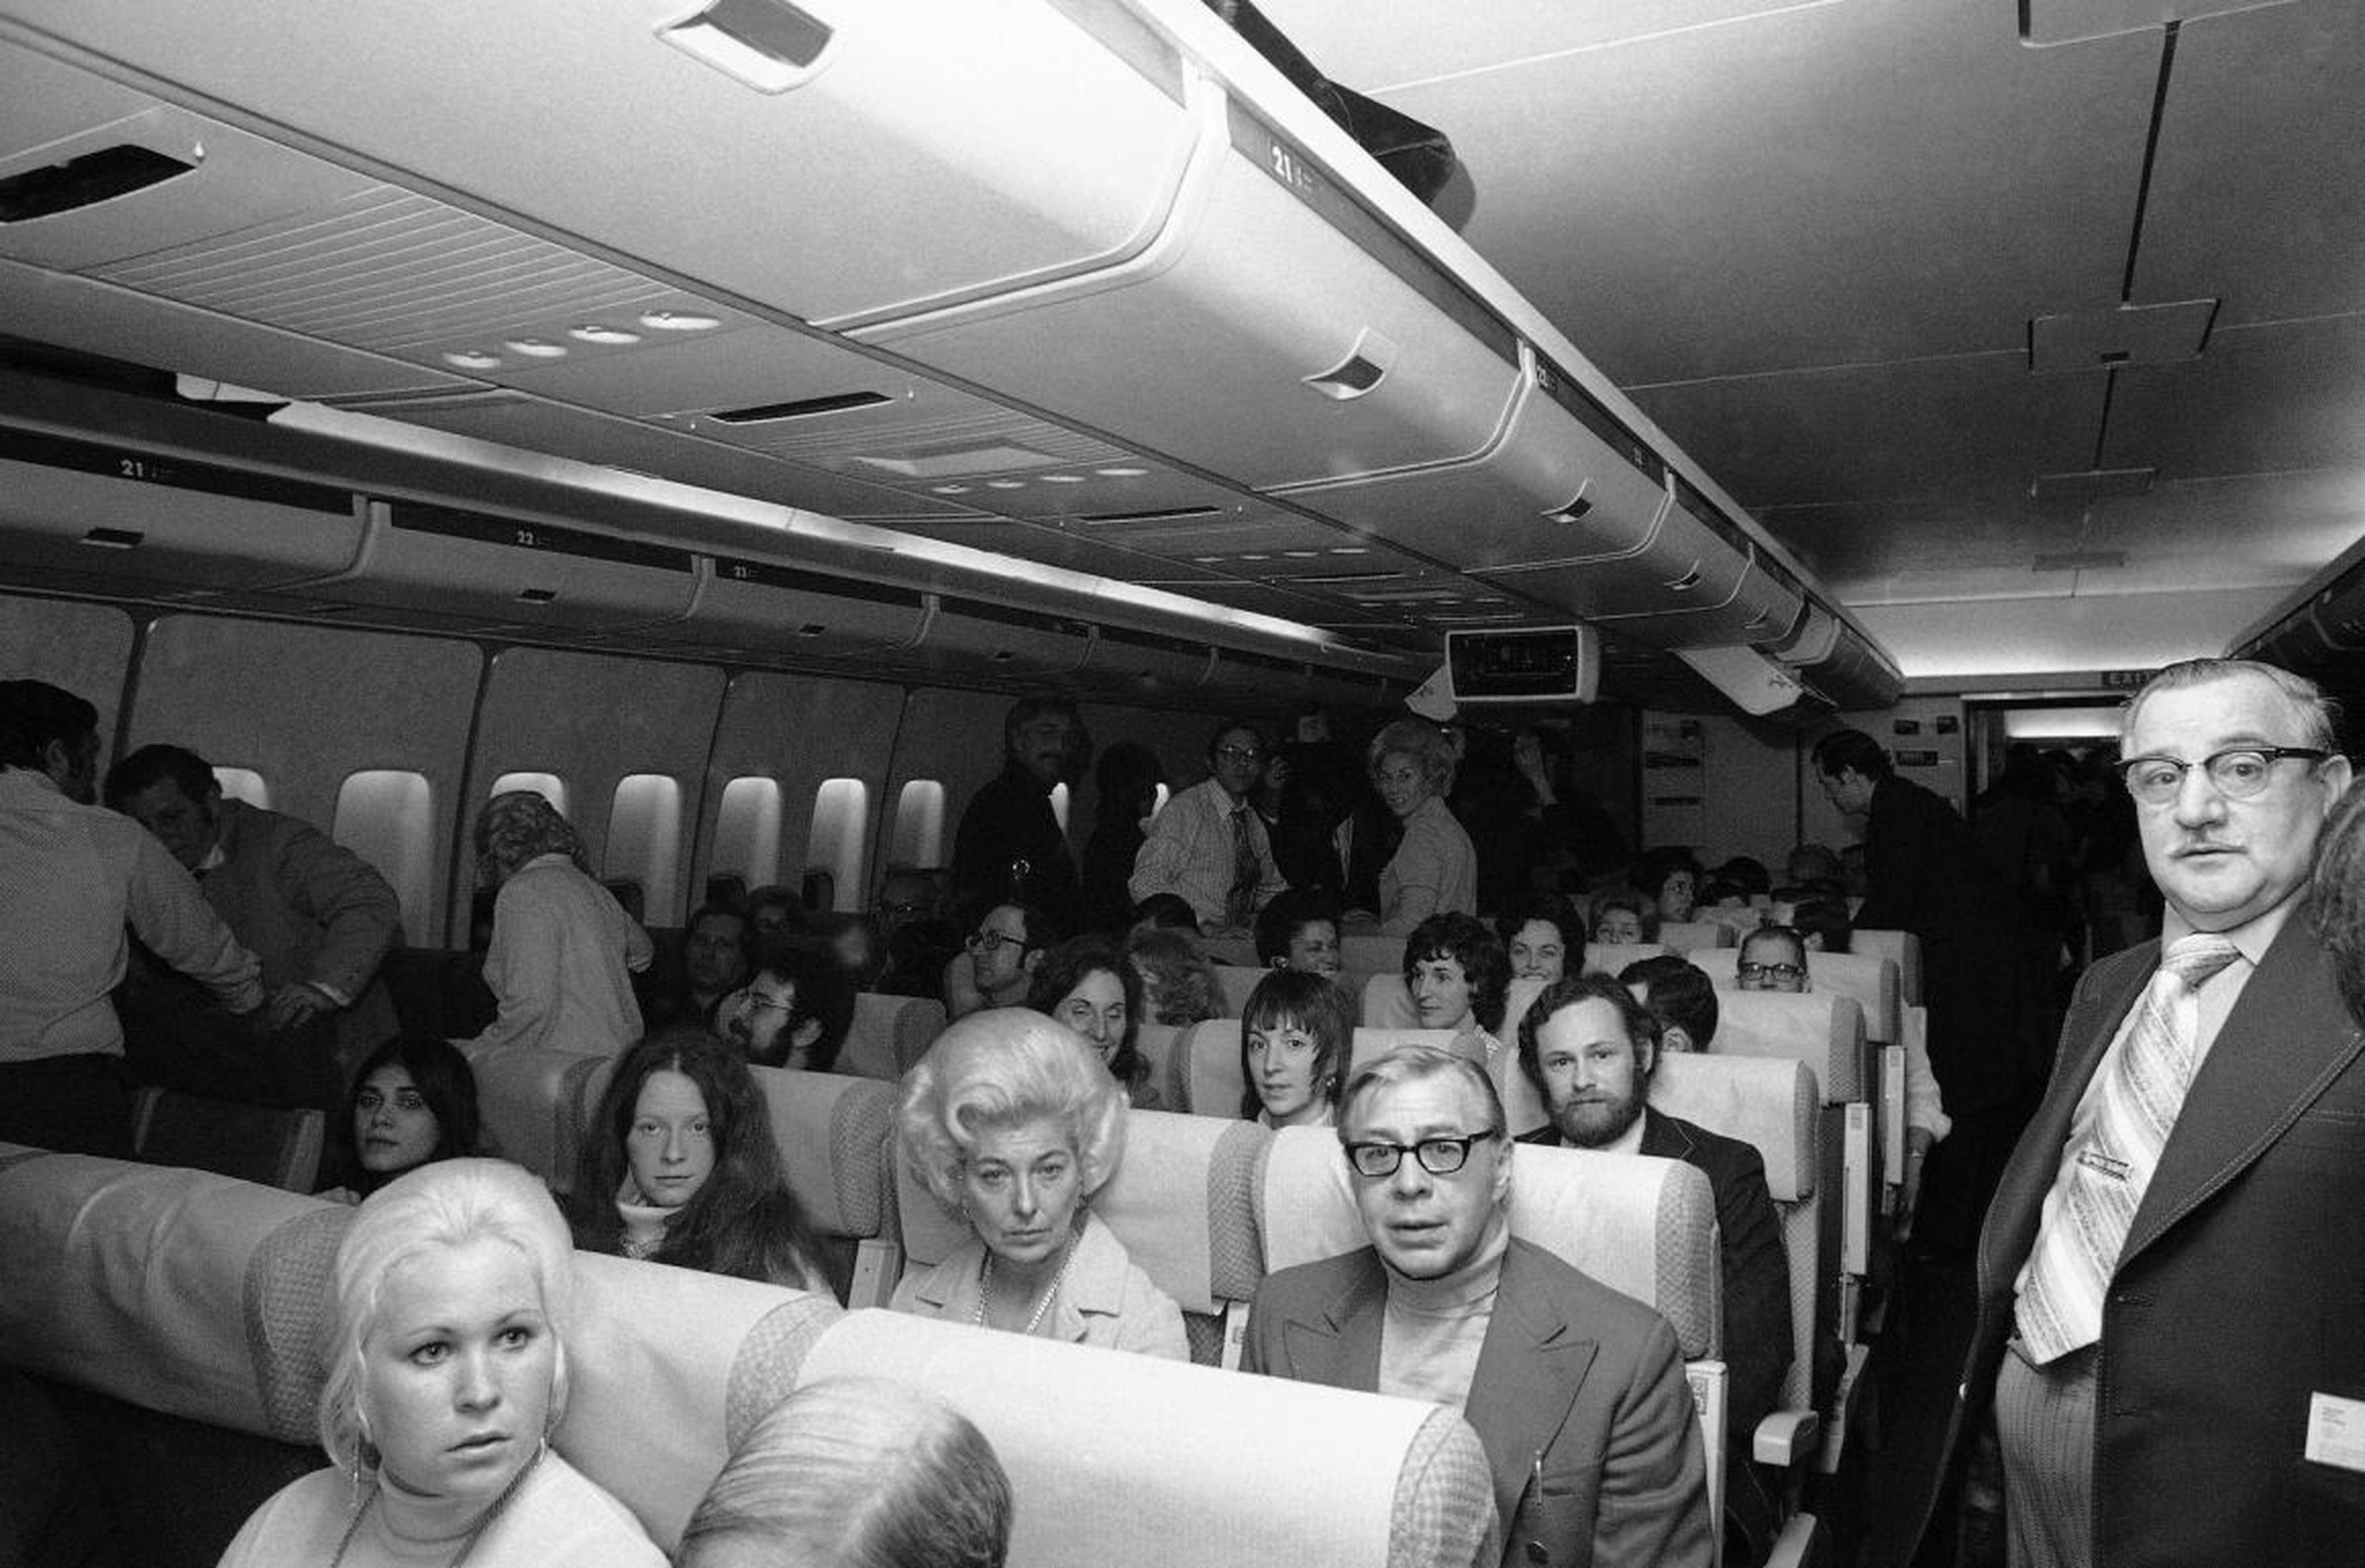 Back in the day, flying was a more formal affair. These days, we take it a lot more casually.